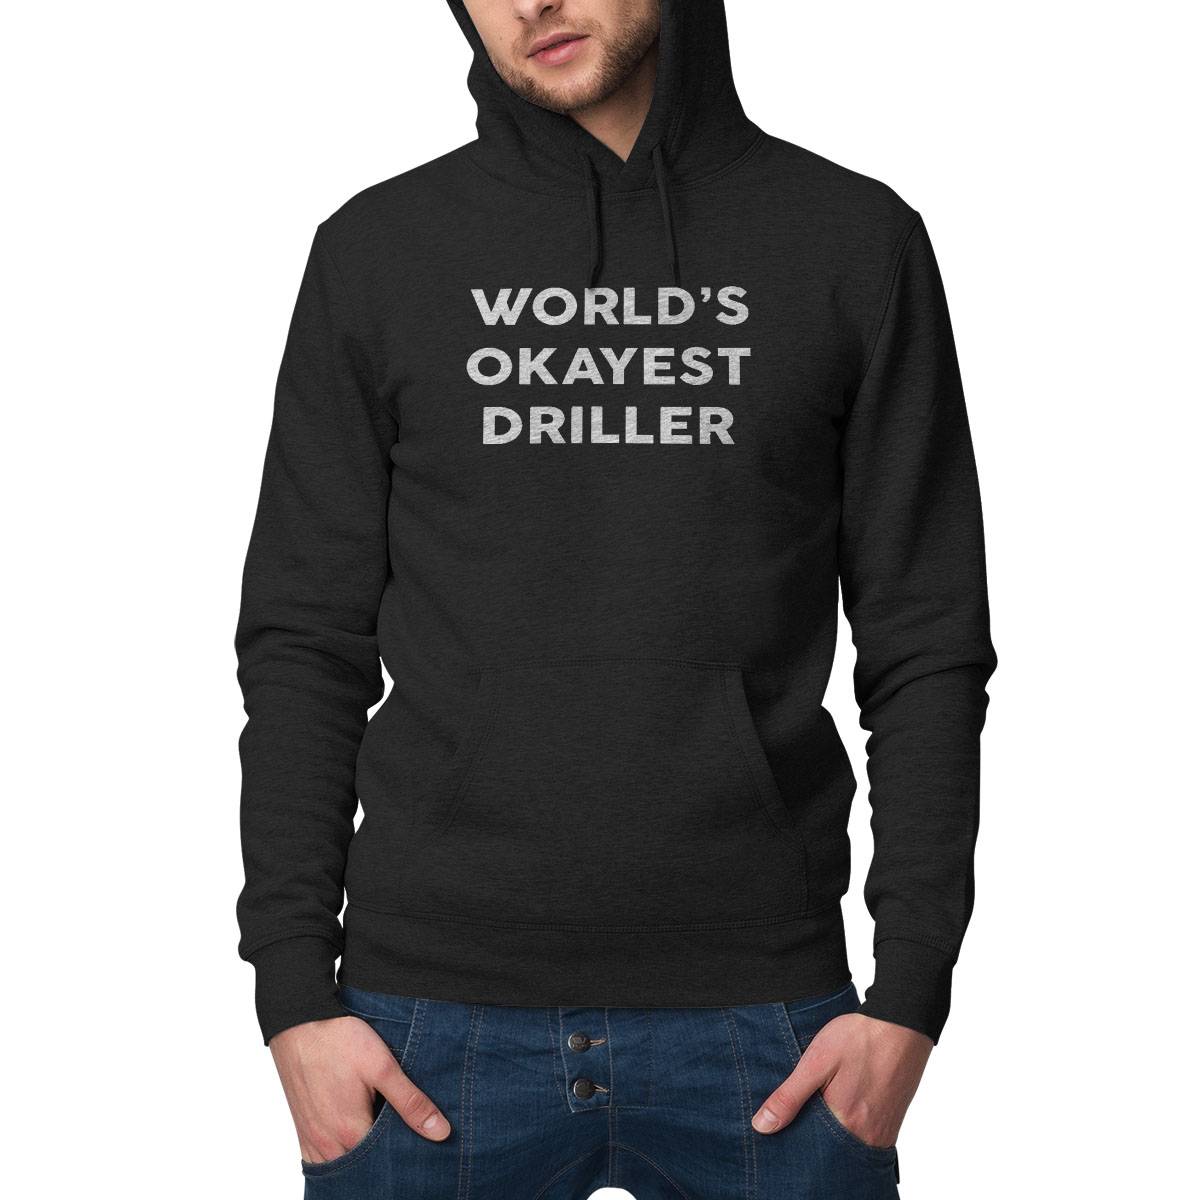 World'S Okayest Driller T-Shirt For Drillers Shirt